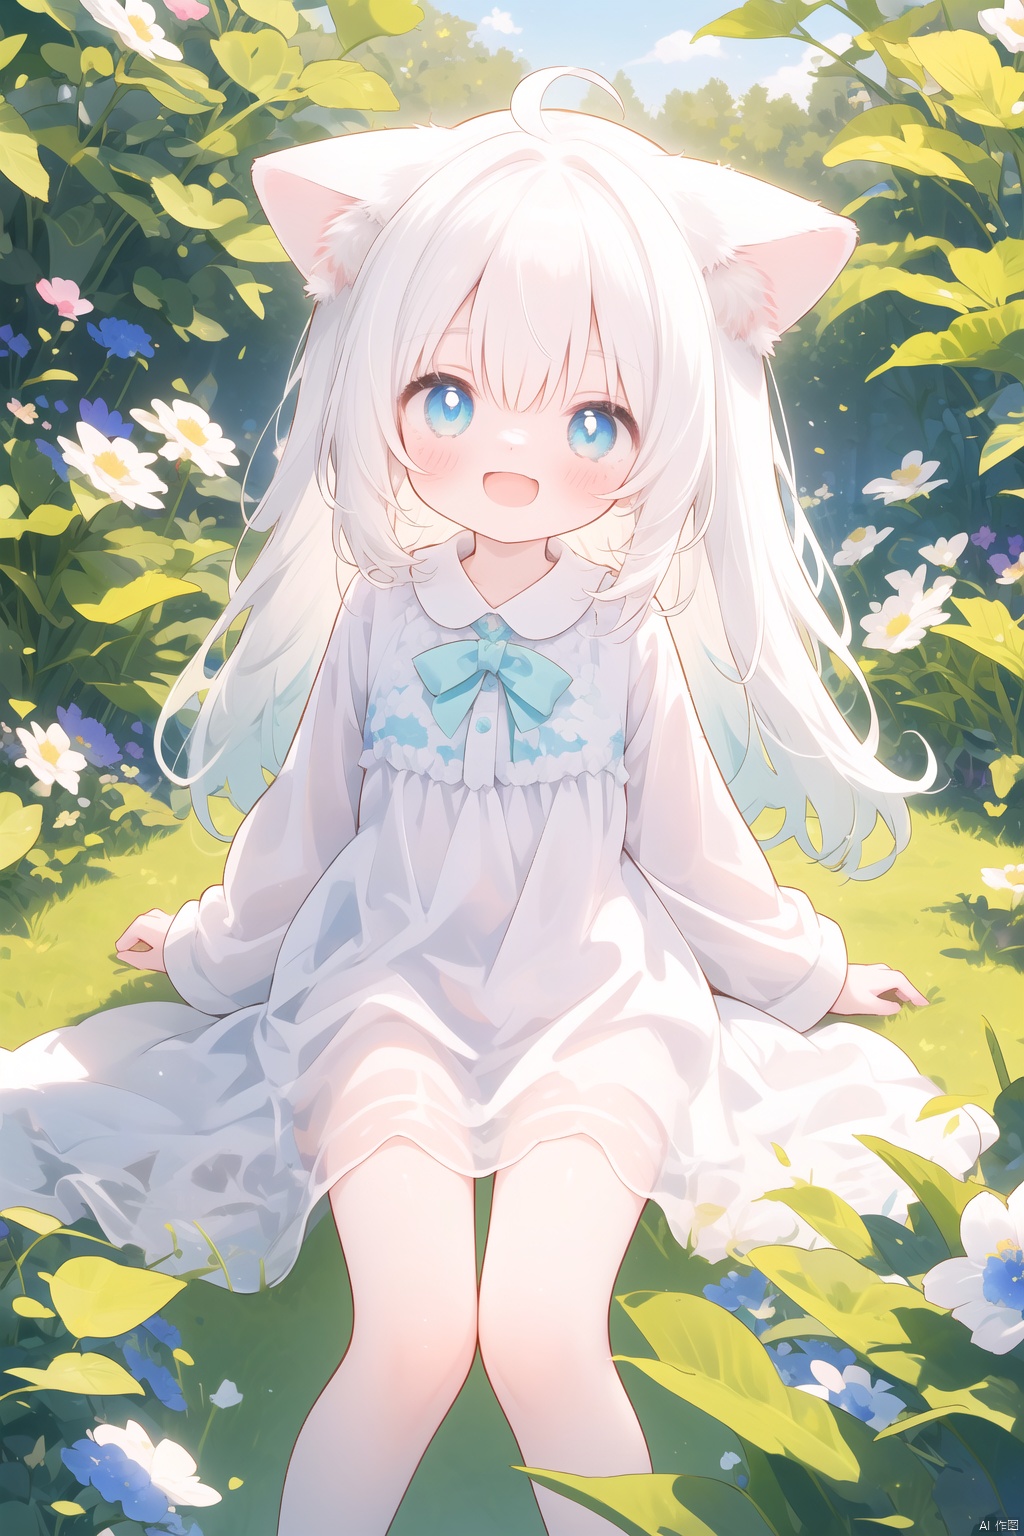 Girl, alone, loli style, animal ears, cat ears, cat tail, white hair, blue pupils, bright sunshine, happy expression, joyful atmosphere, cat ears drooping, grass, lush green, flowers blooming, bright colors, natural light and shadow.